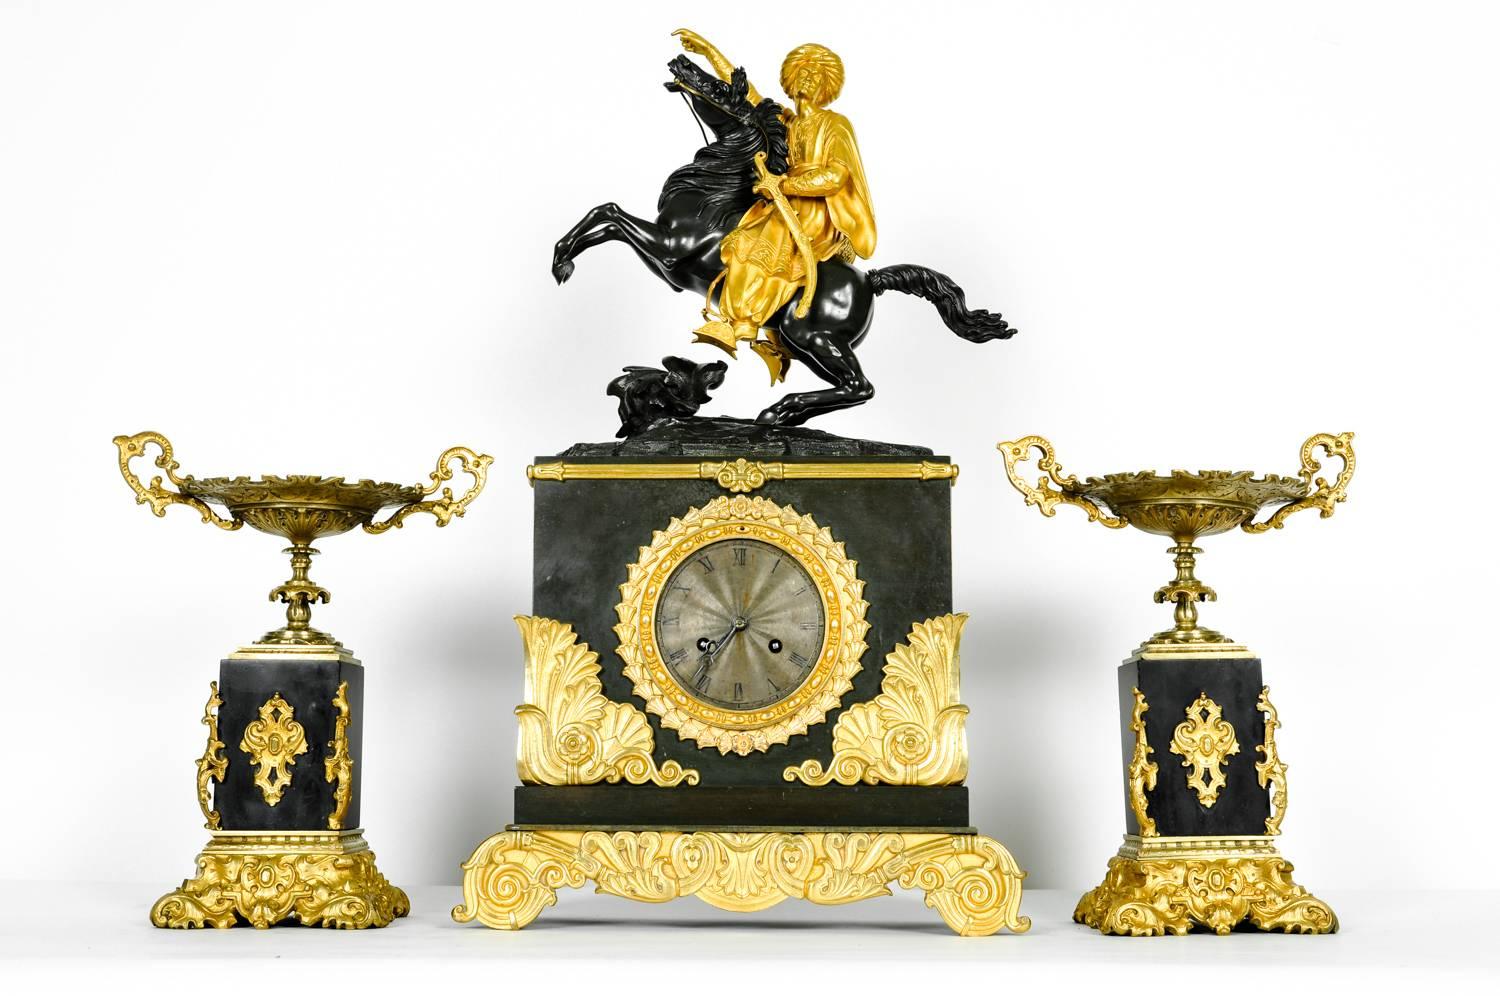 A fine and early 18th century French Empire ormolu fire gilded or bronze doré clock with two candleholder. The original gilding is in exquisite condition with a lovely golden glow. The clock depicts a soldier with his sword on top of his stallion.